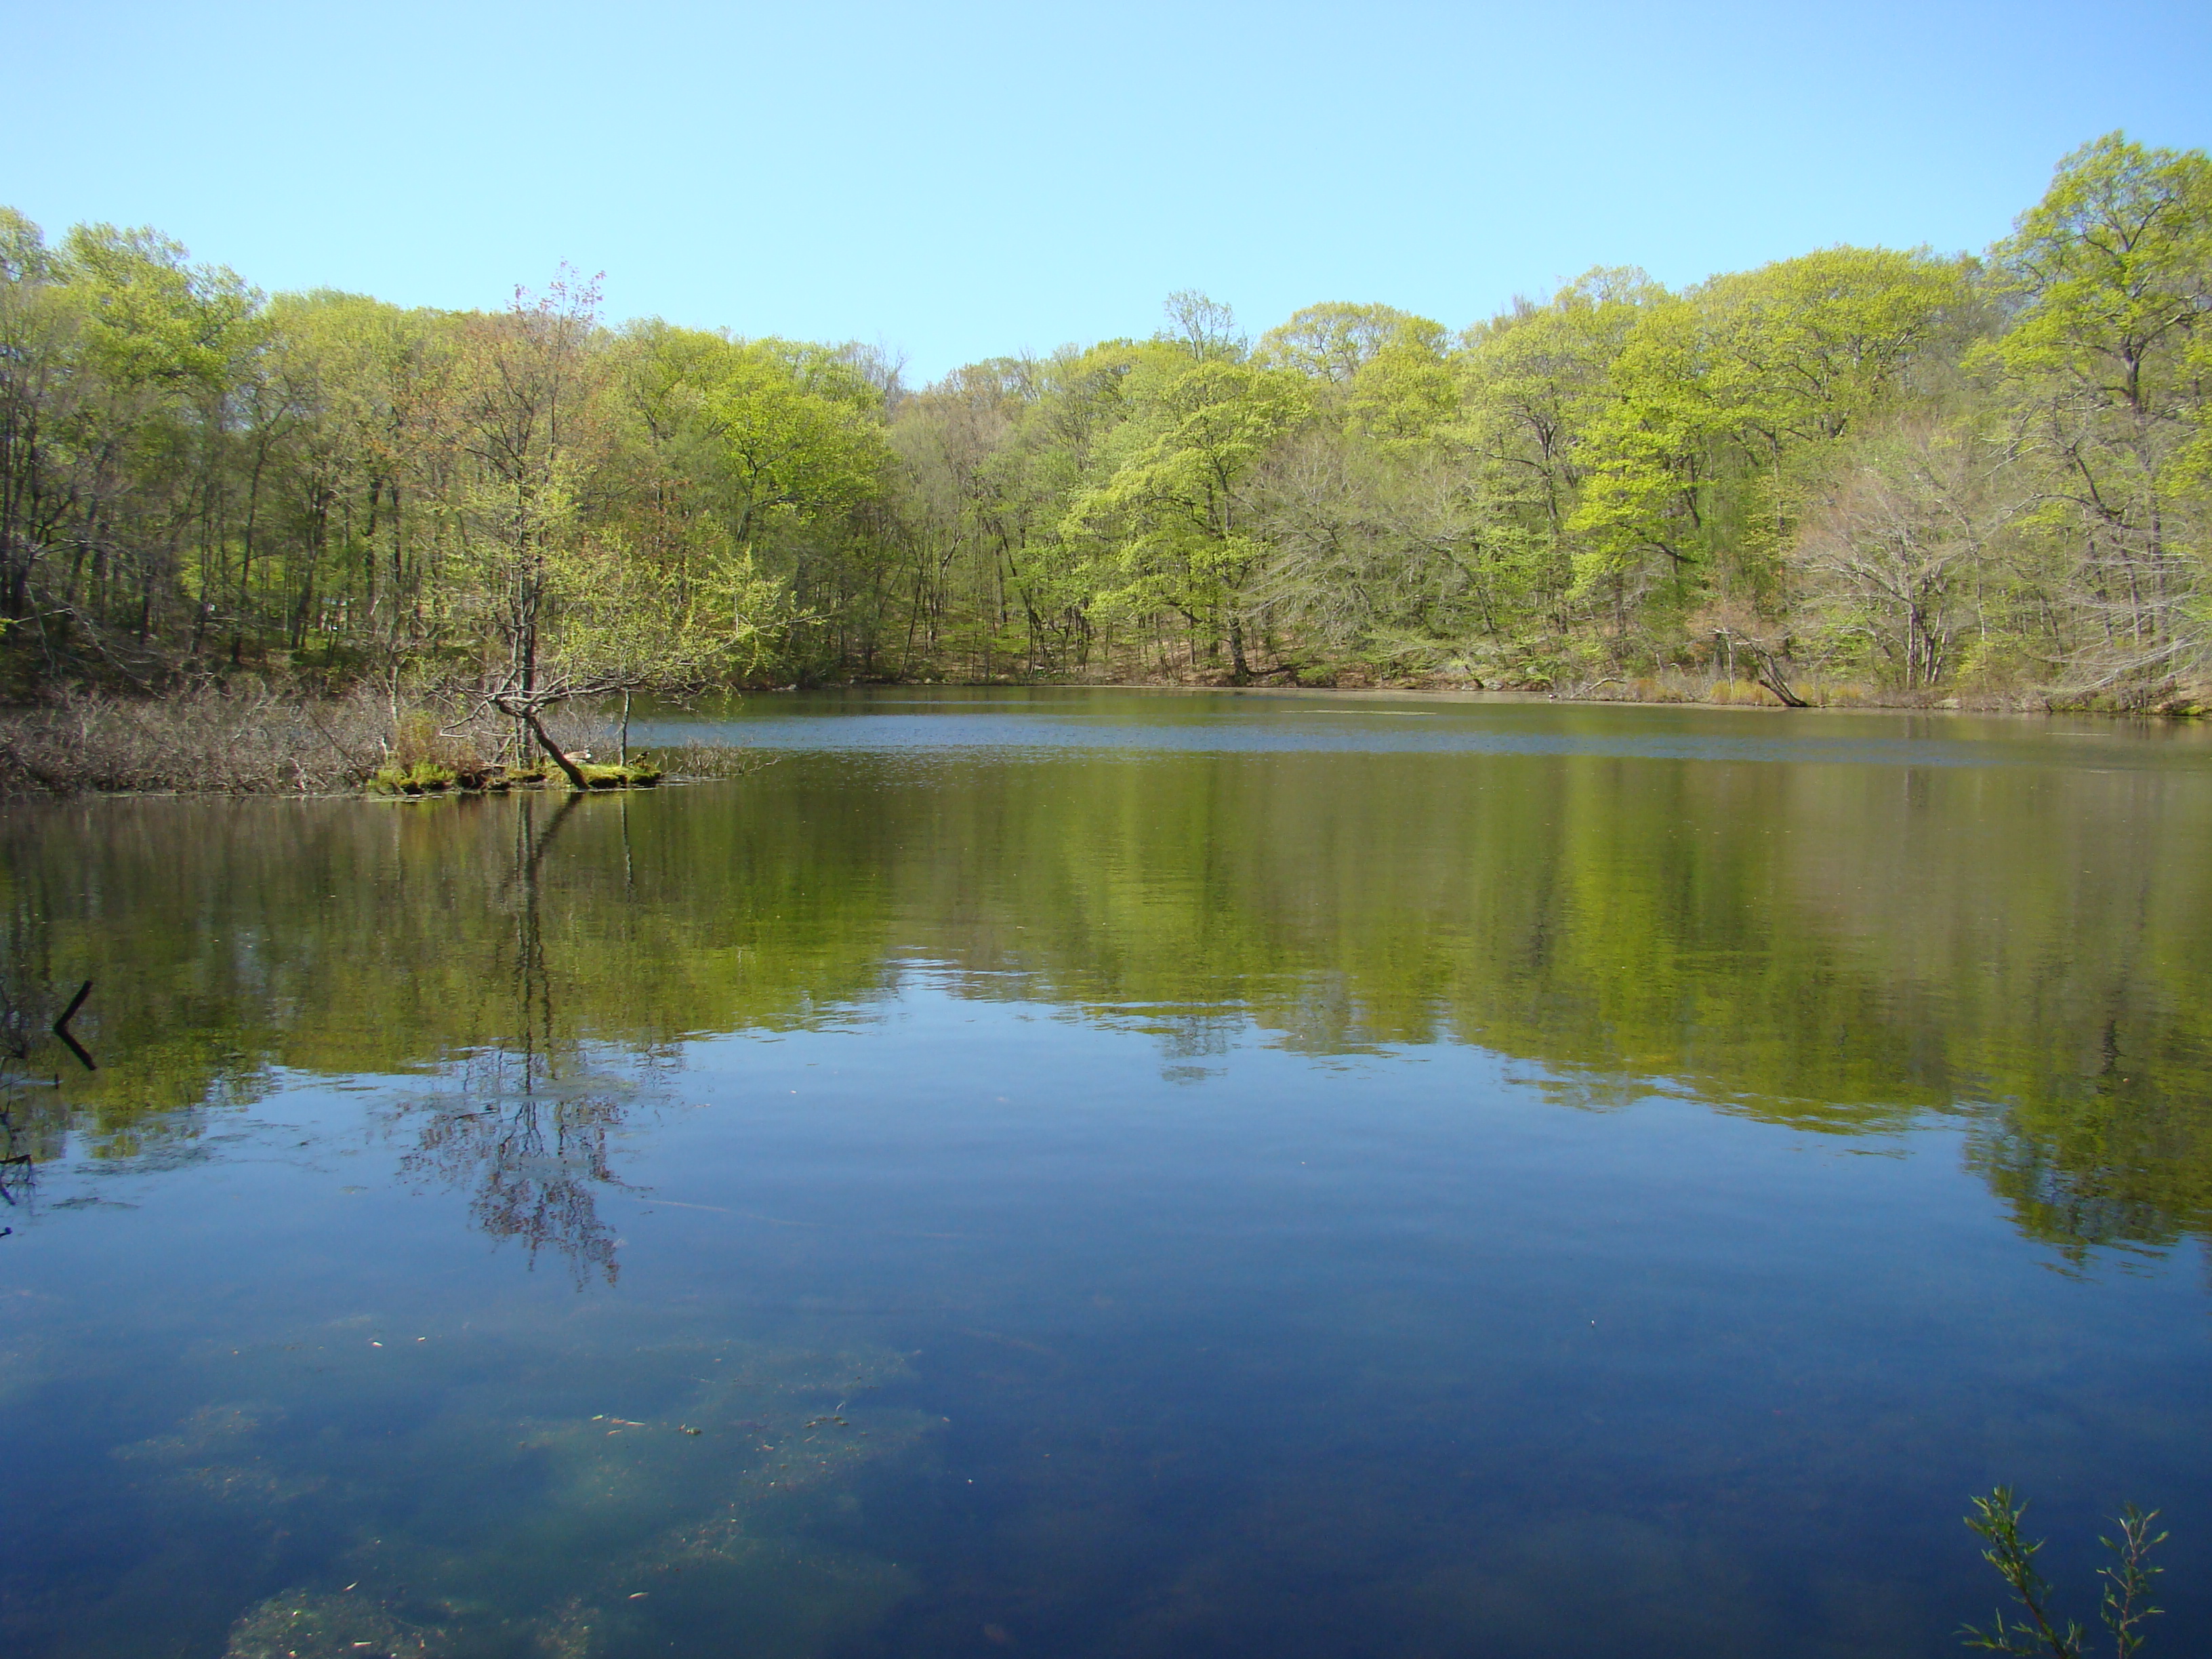 A large still pond in the foreground reflects the tree line that rims the pond.